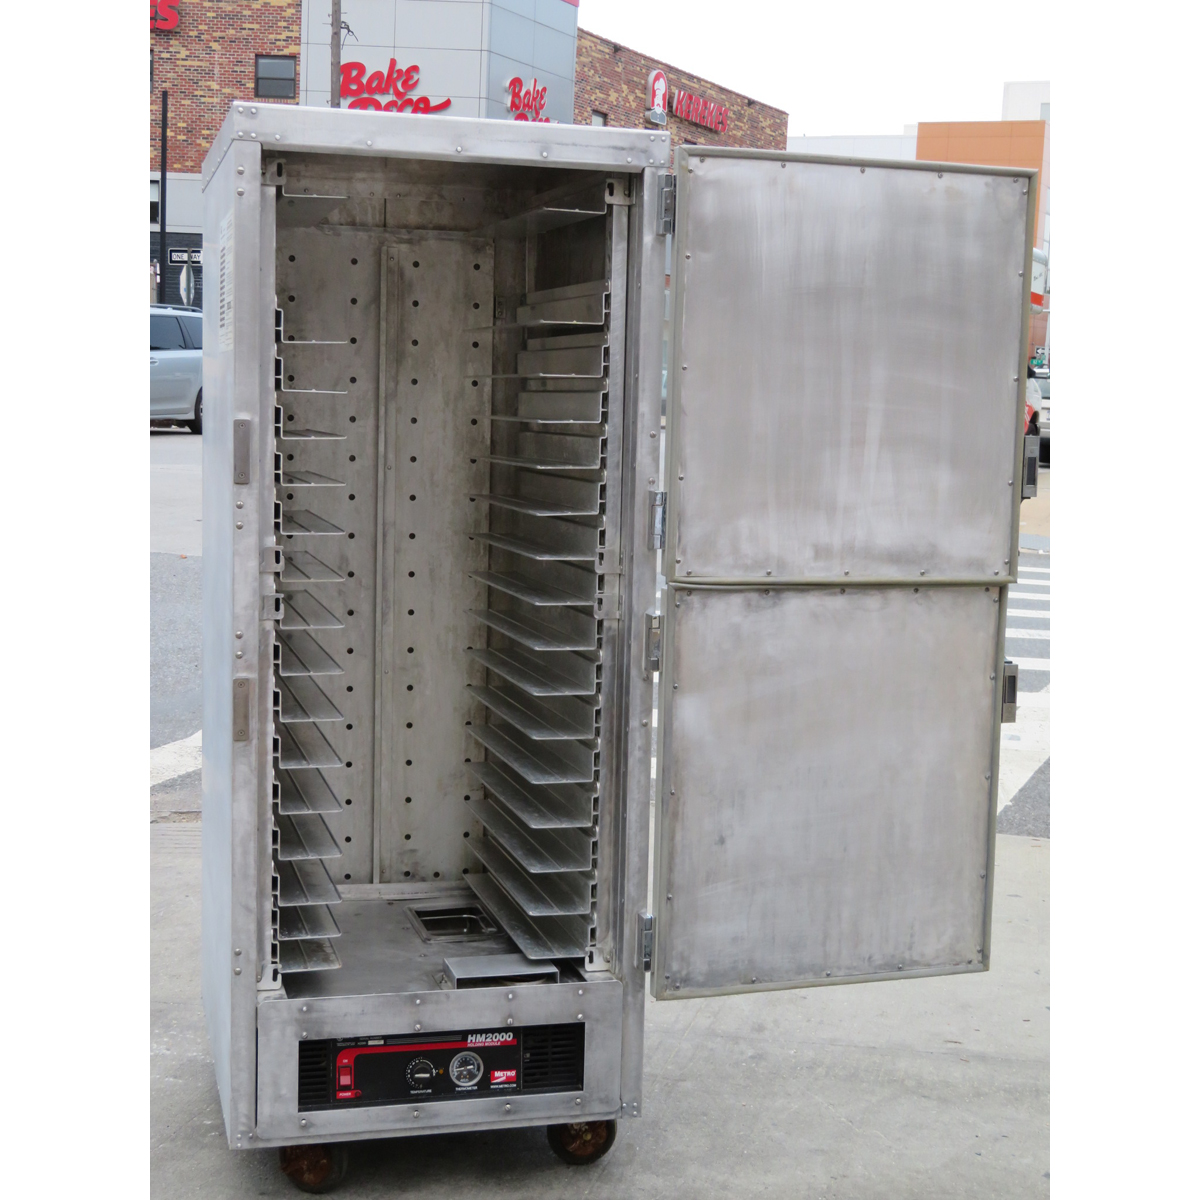 Metro C199-HM2000 Heating Cabinet Food Warmer, Used Excellent Condition image 1